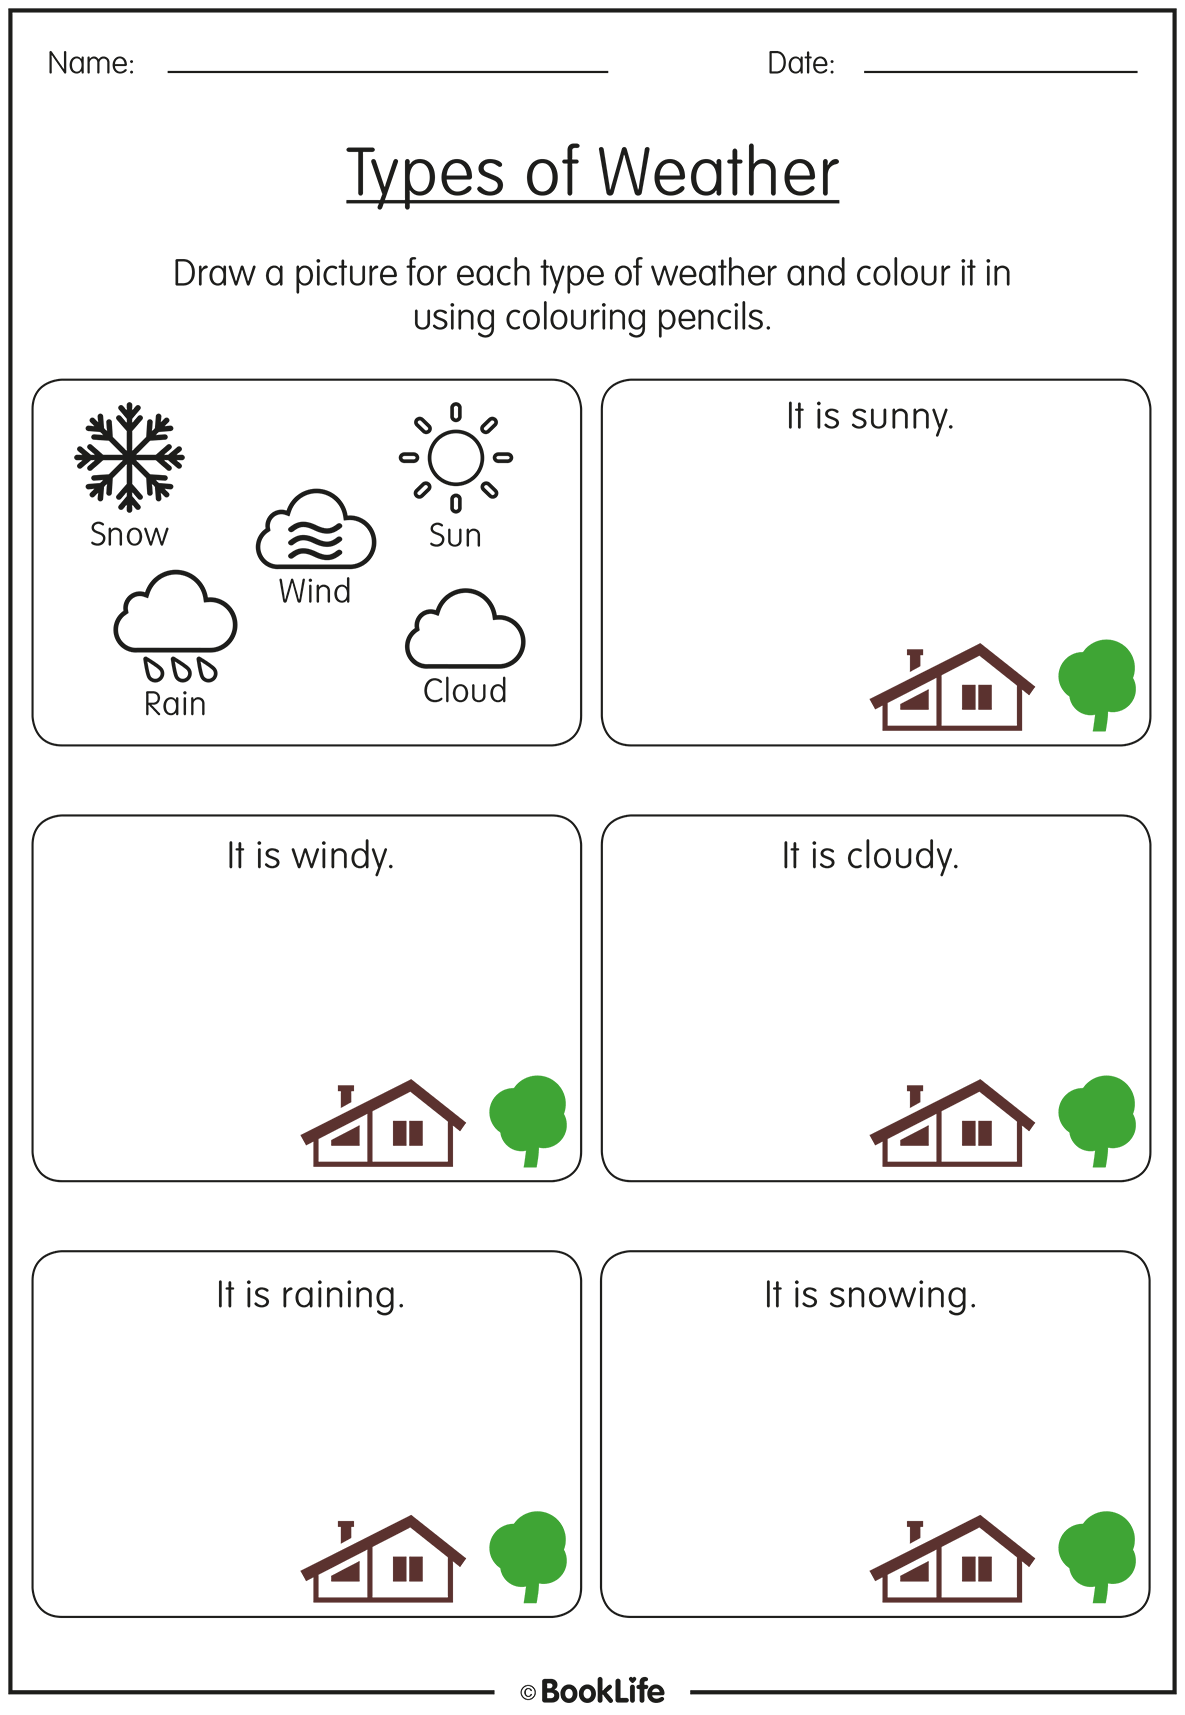 Types of Weather by BookLife